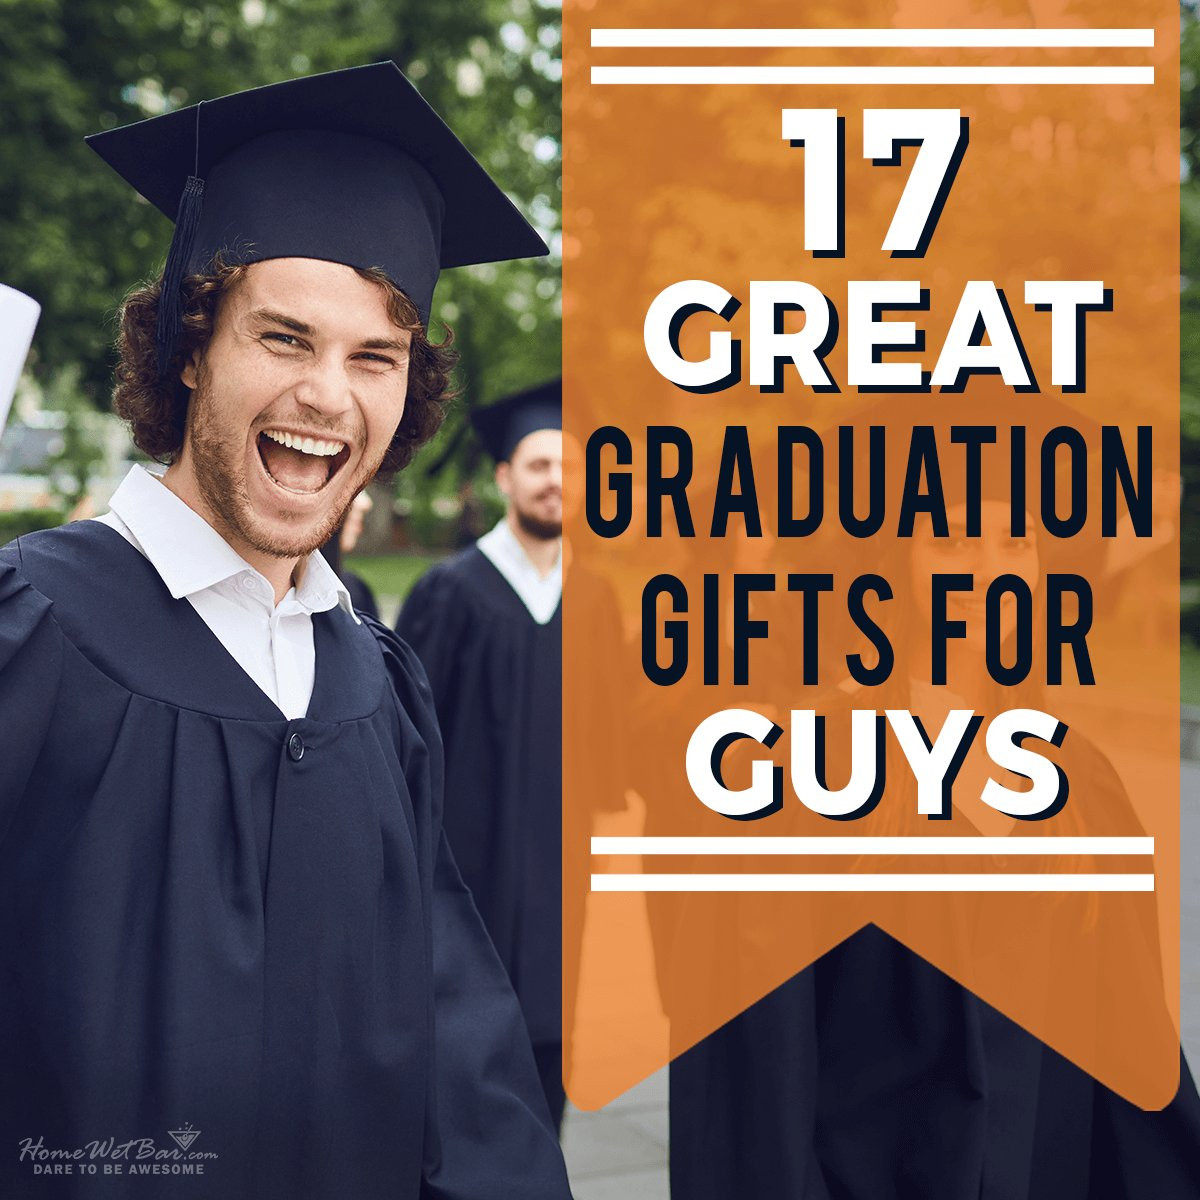 Guy Graduation Gift Ideas
 17 Great Graduation Gifts for Guys